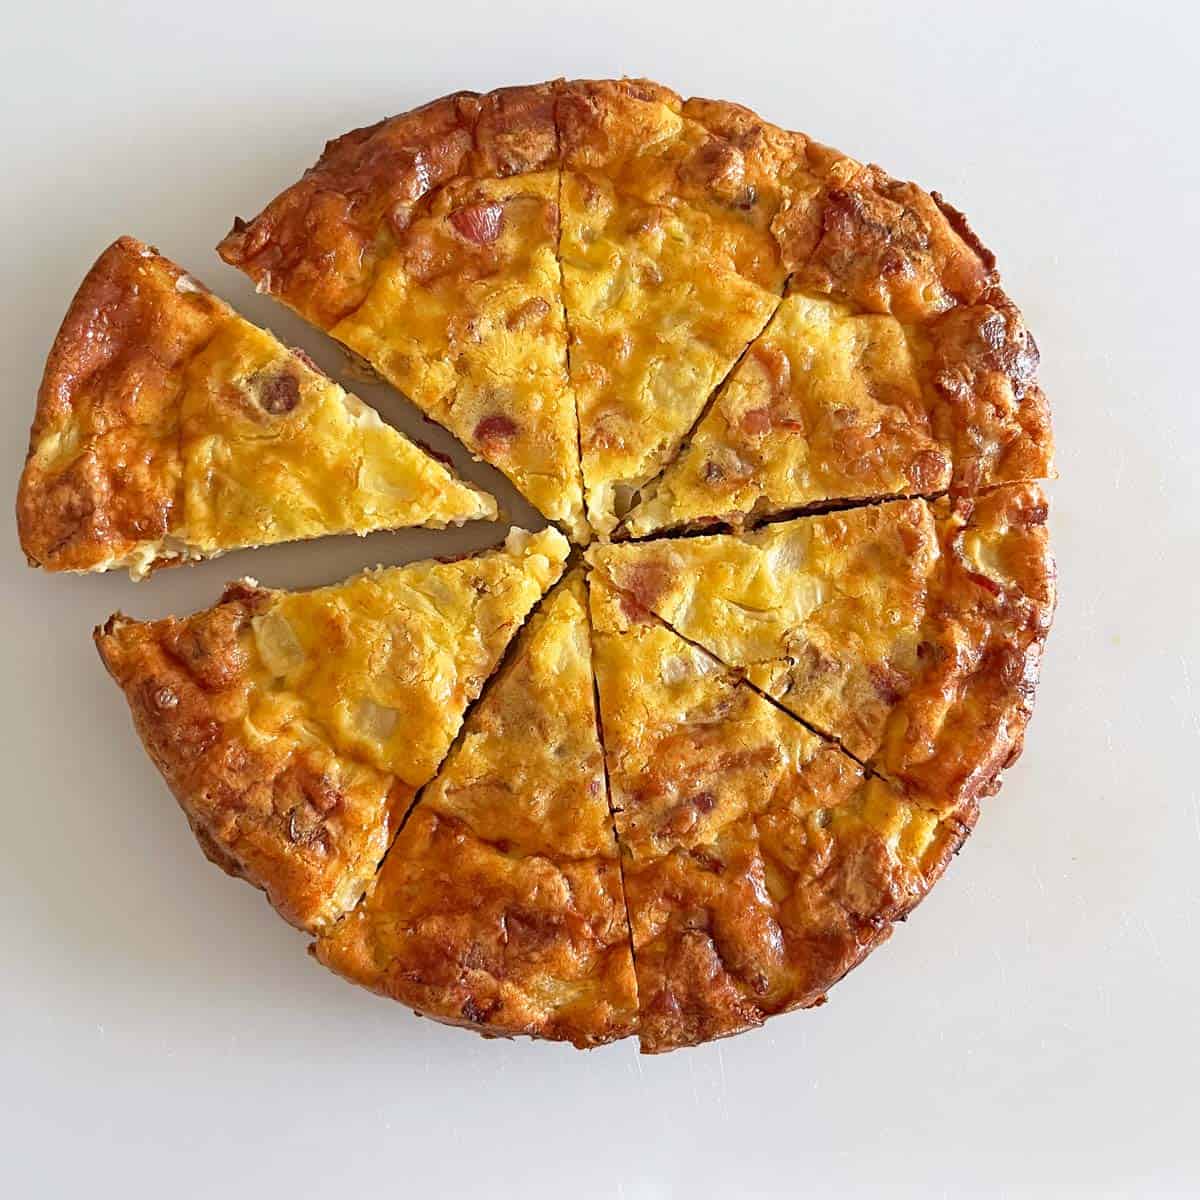 The quiche was sliced on a cutting board.